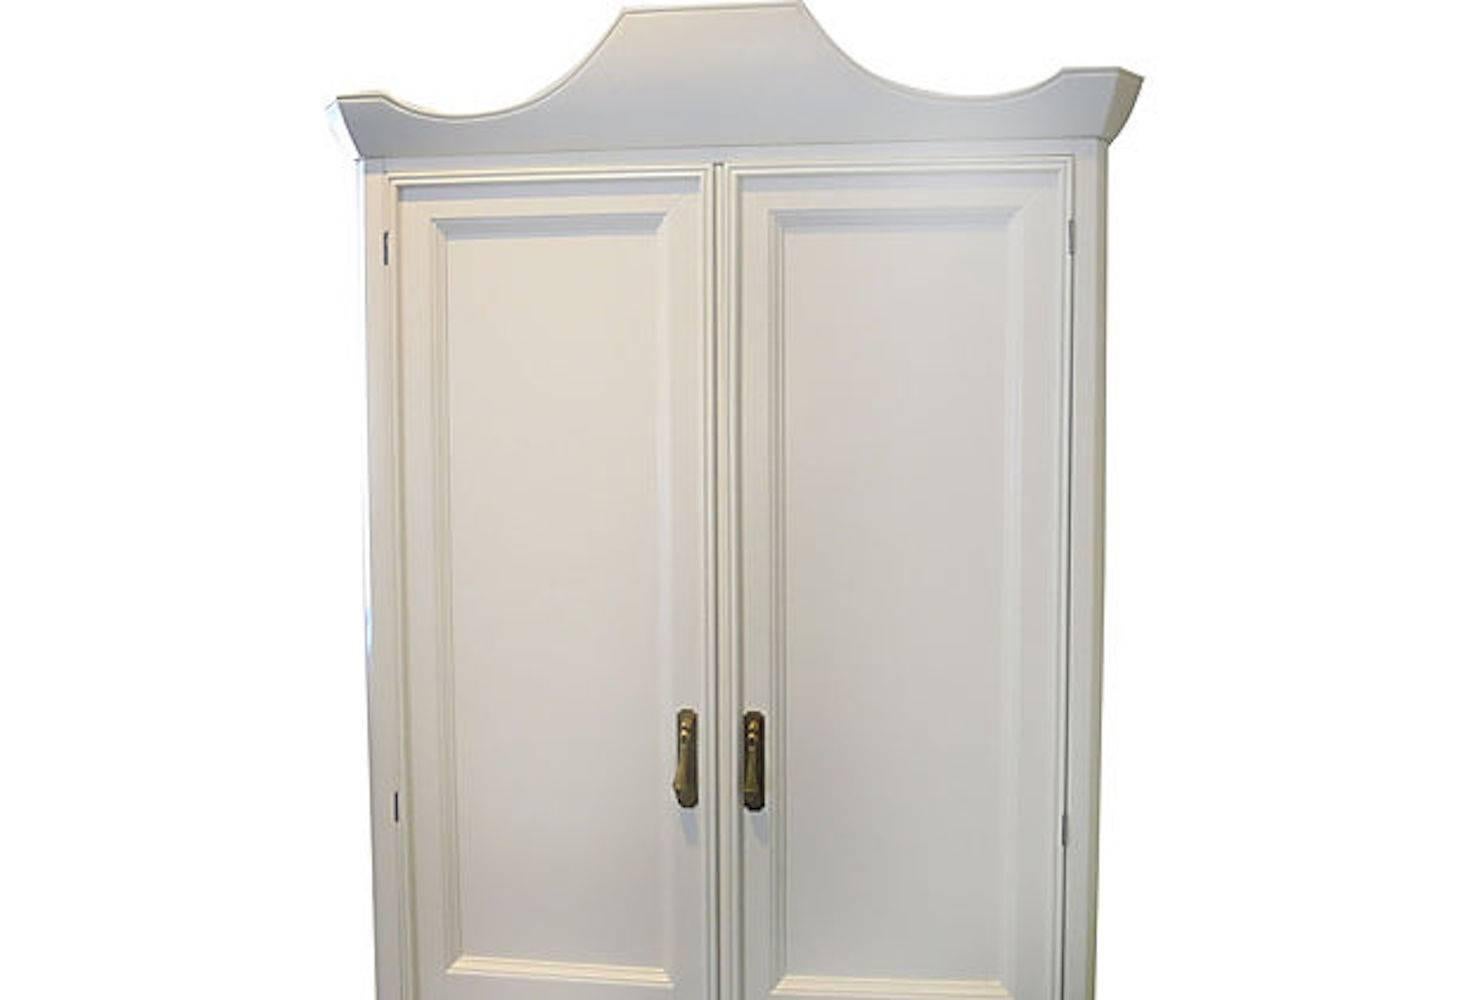 Painted 1960s White Pagoda Style Chinoiserie Armoire/Cabinet